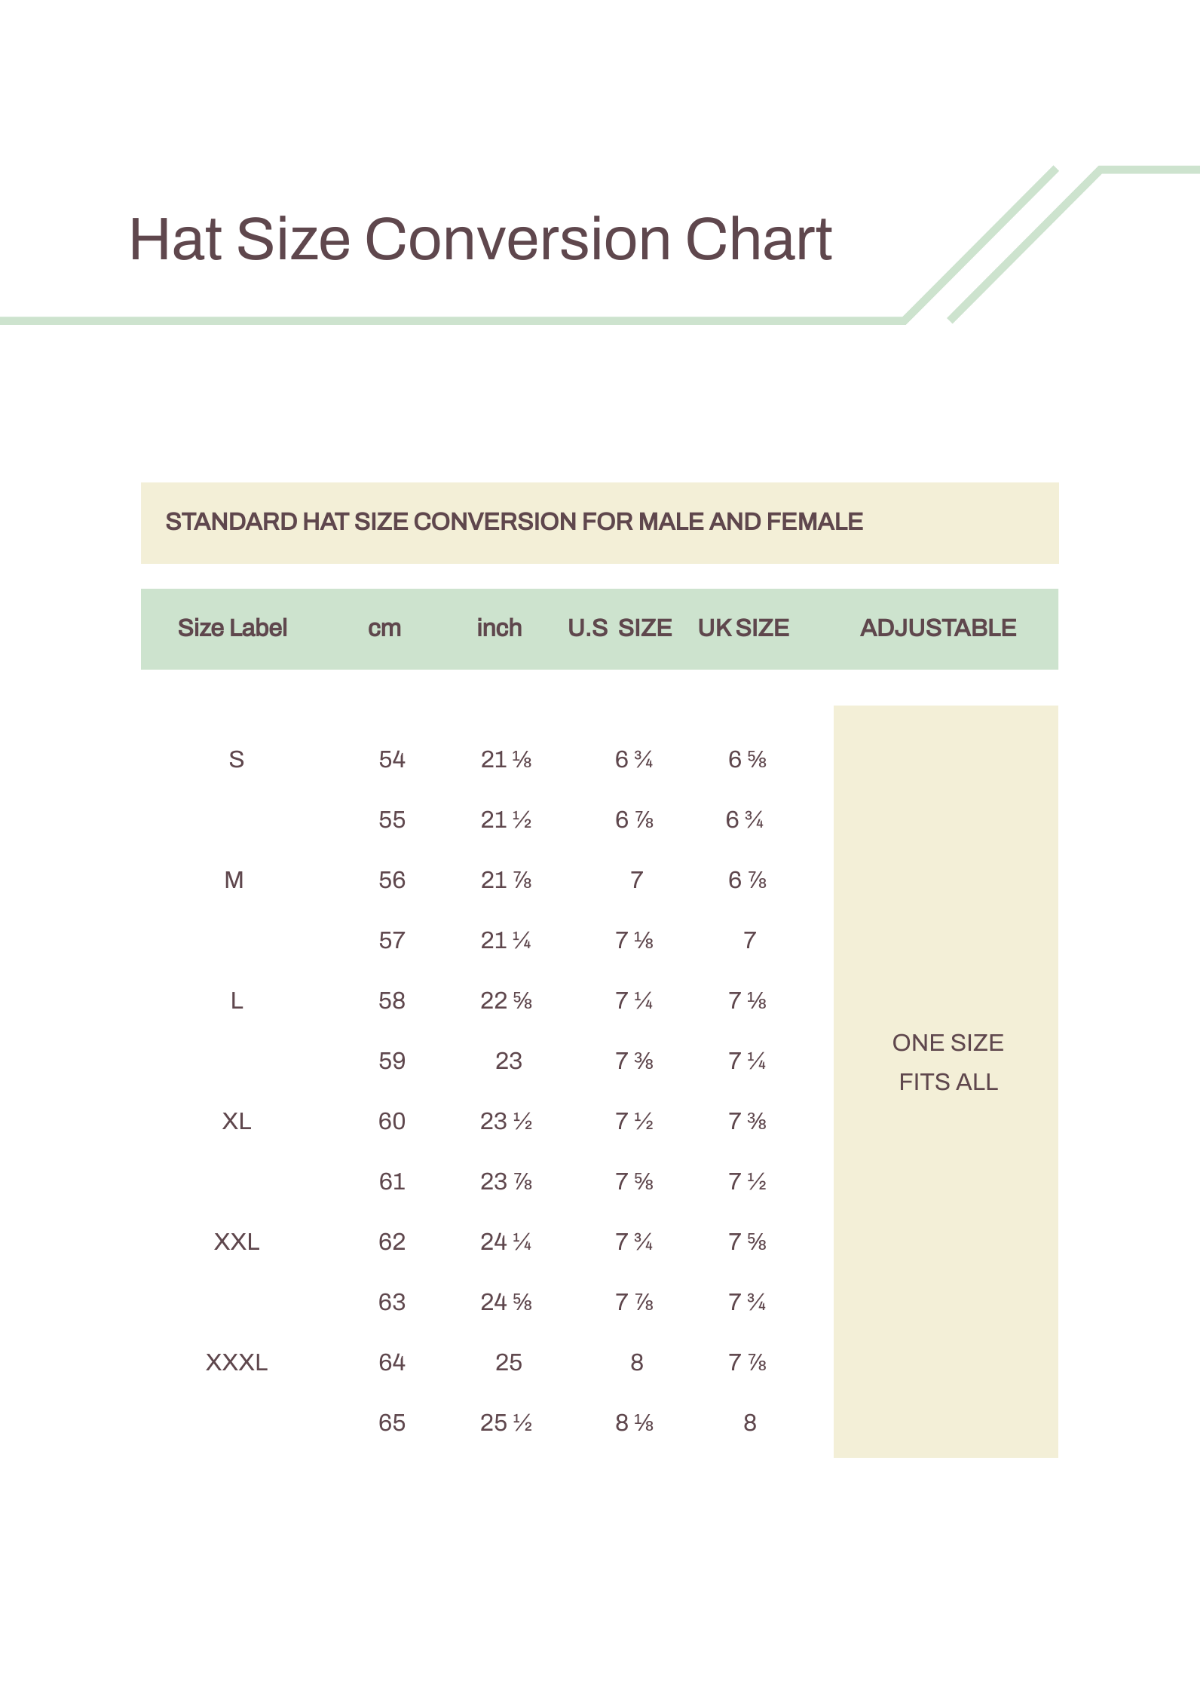 Hat Size Conversion Chart Template